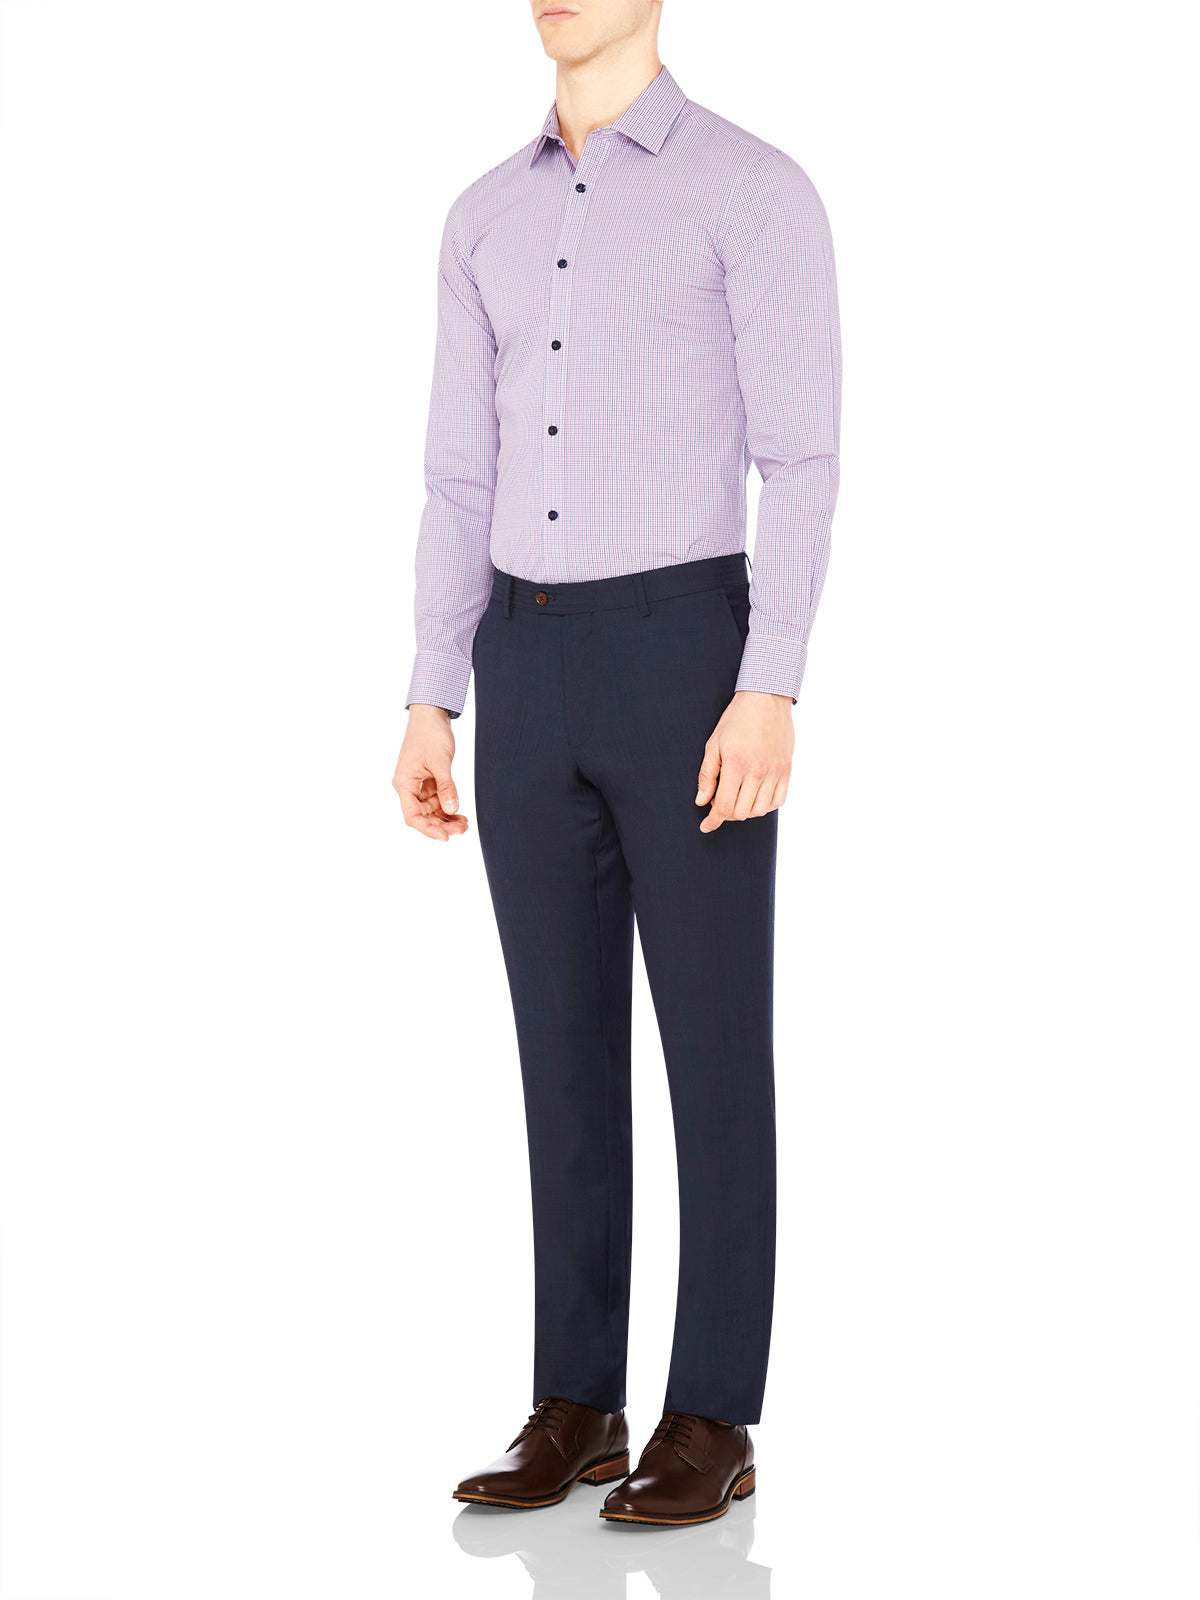 NEW HOPKINS LUX SUIT TROUSERS NVY